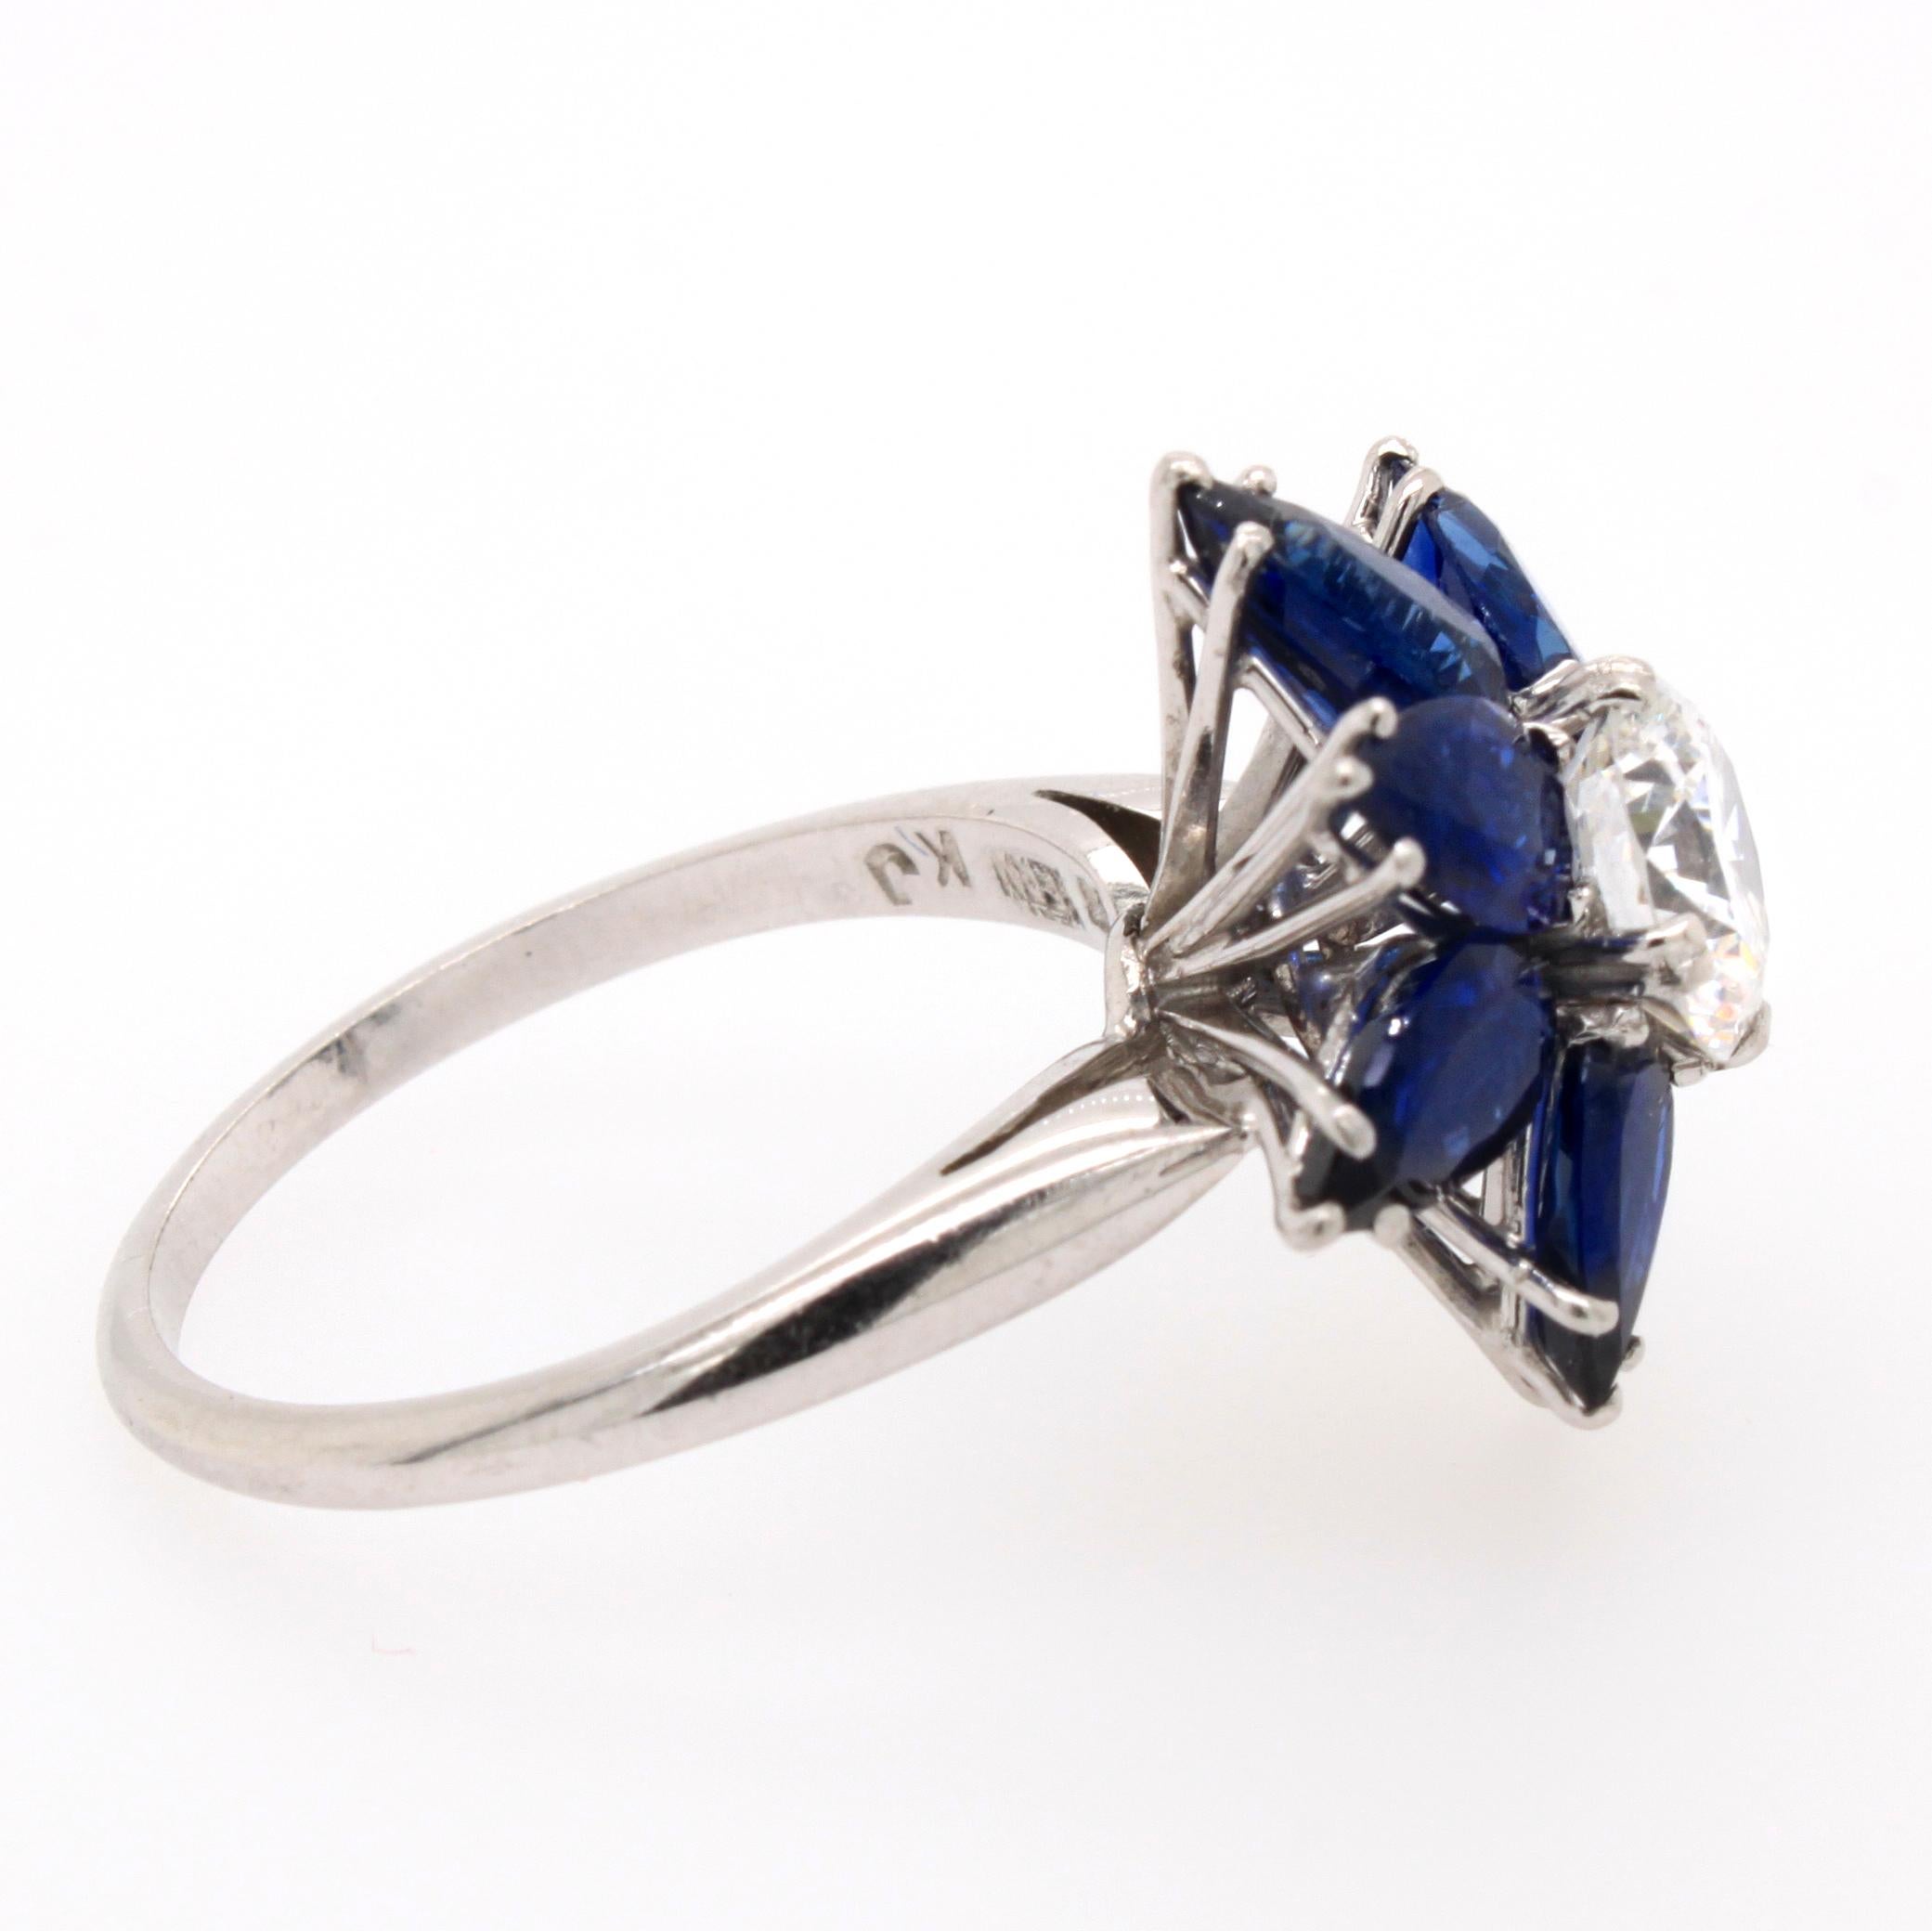 Brilliant Cut Diamond Sapphire Flower Cocktail Ring by Kern, 1980s